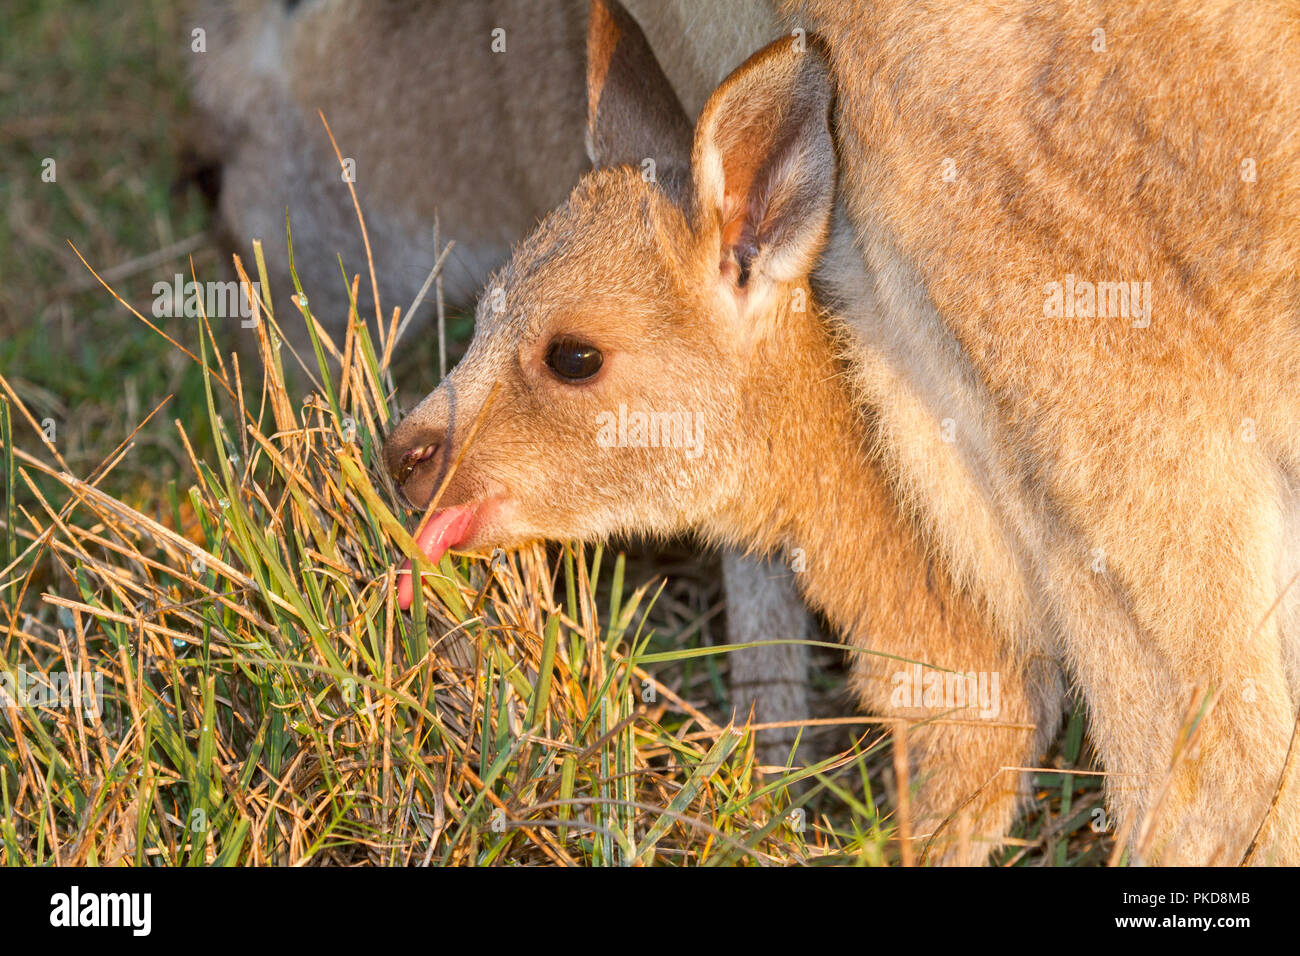 Baby joey eastern grey kangaroo, Macropus giganteus, leaning out of pouch between its moher's legs with tongue licking grass in NSW Australia Stock Photo